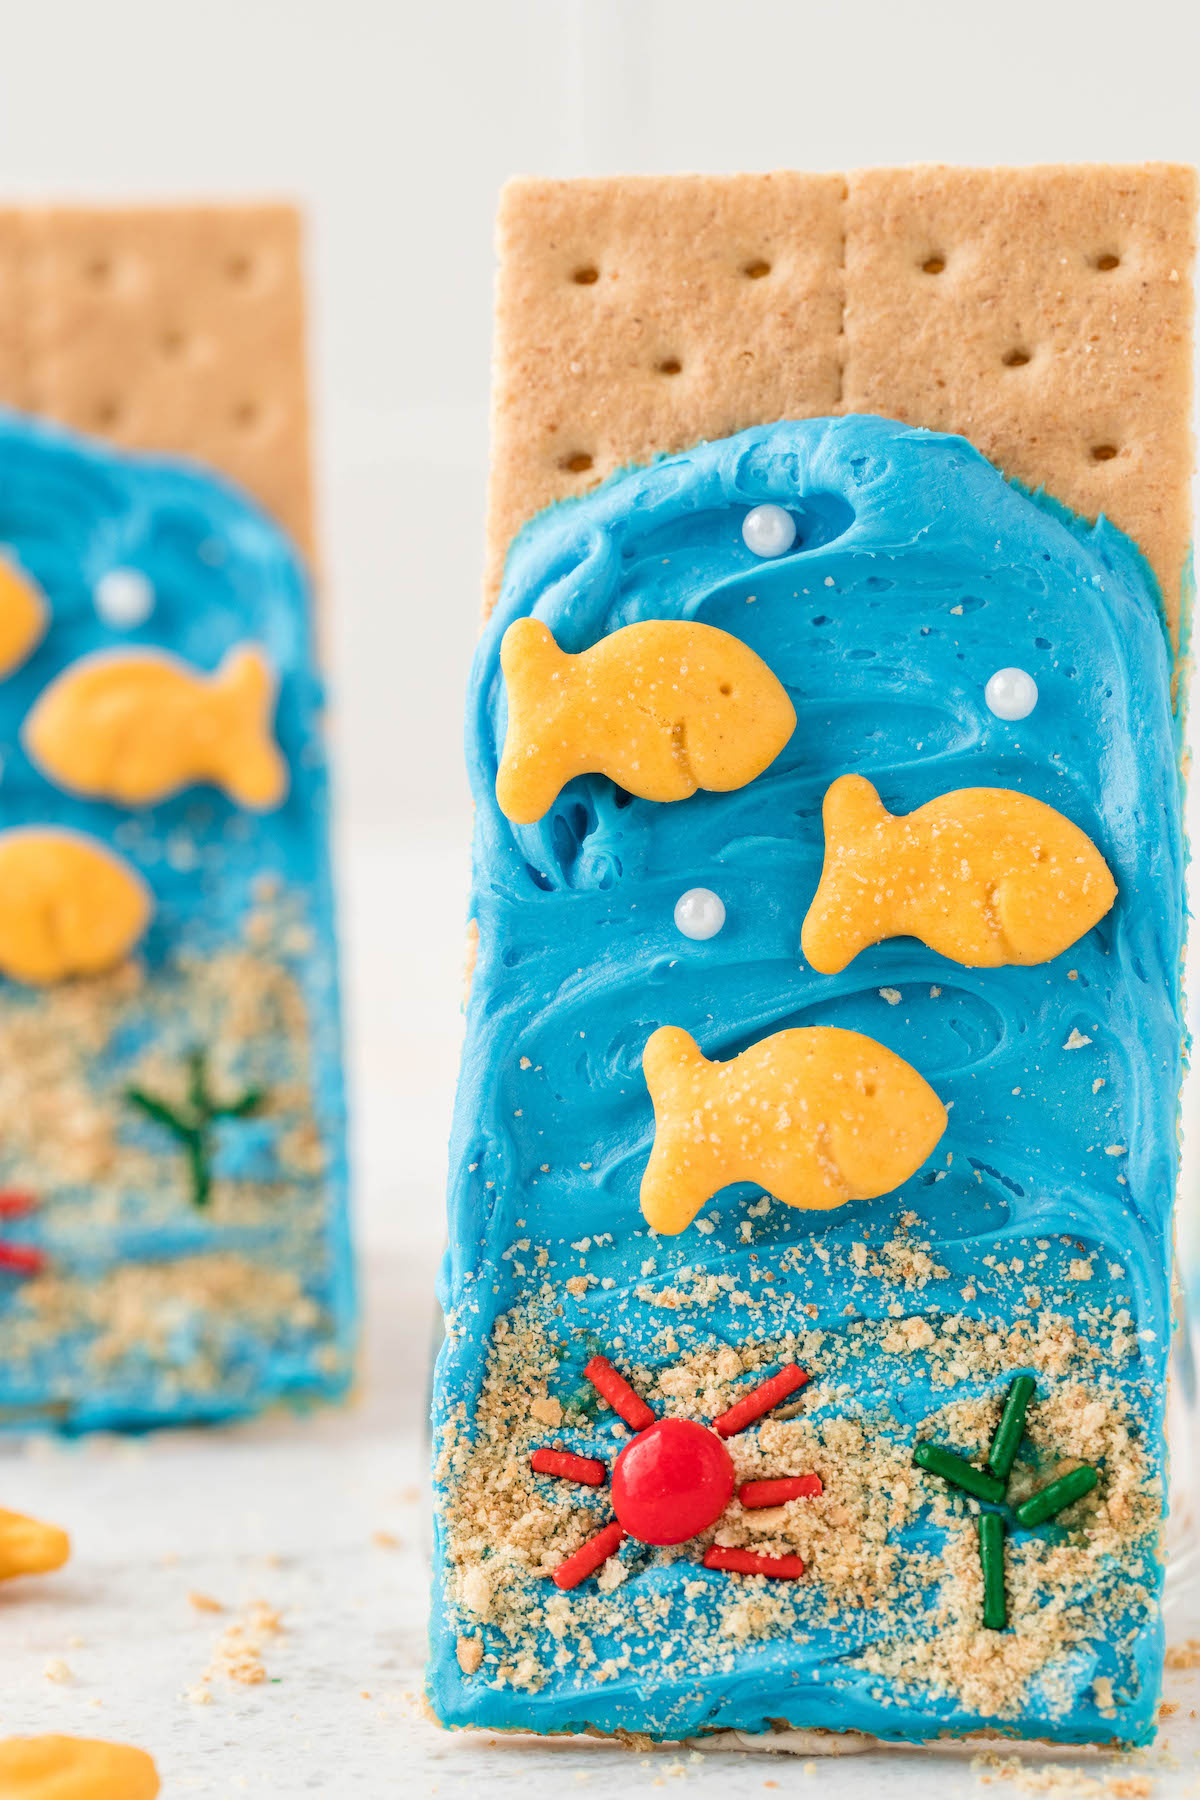 upright graham cracker snack with an ocean theme